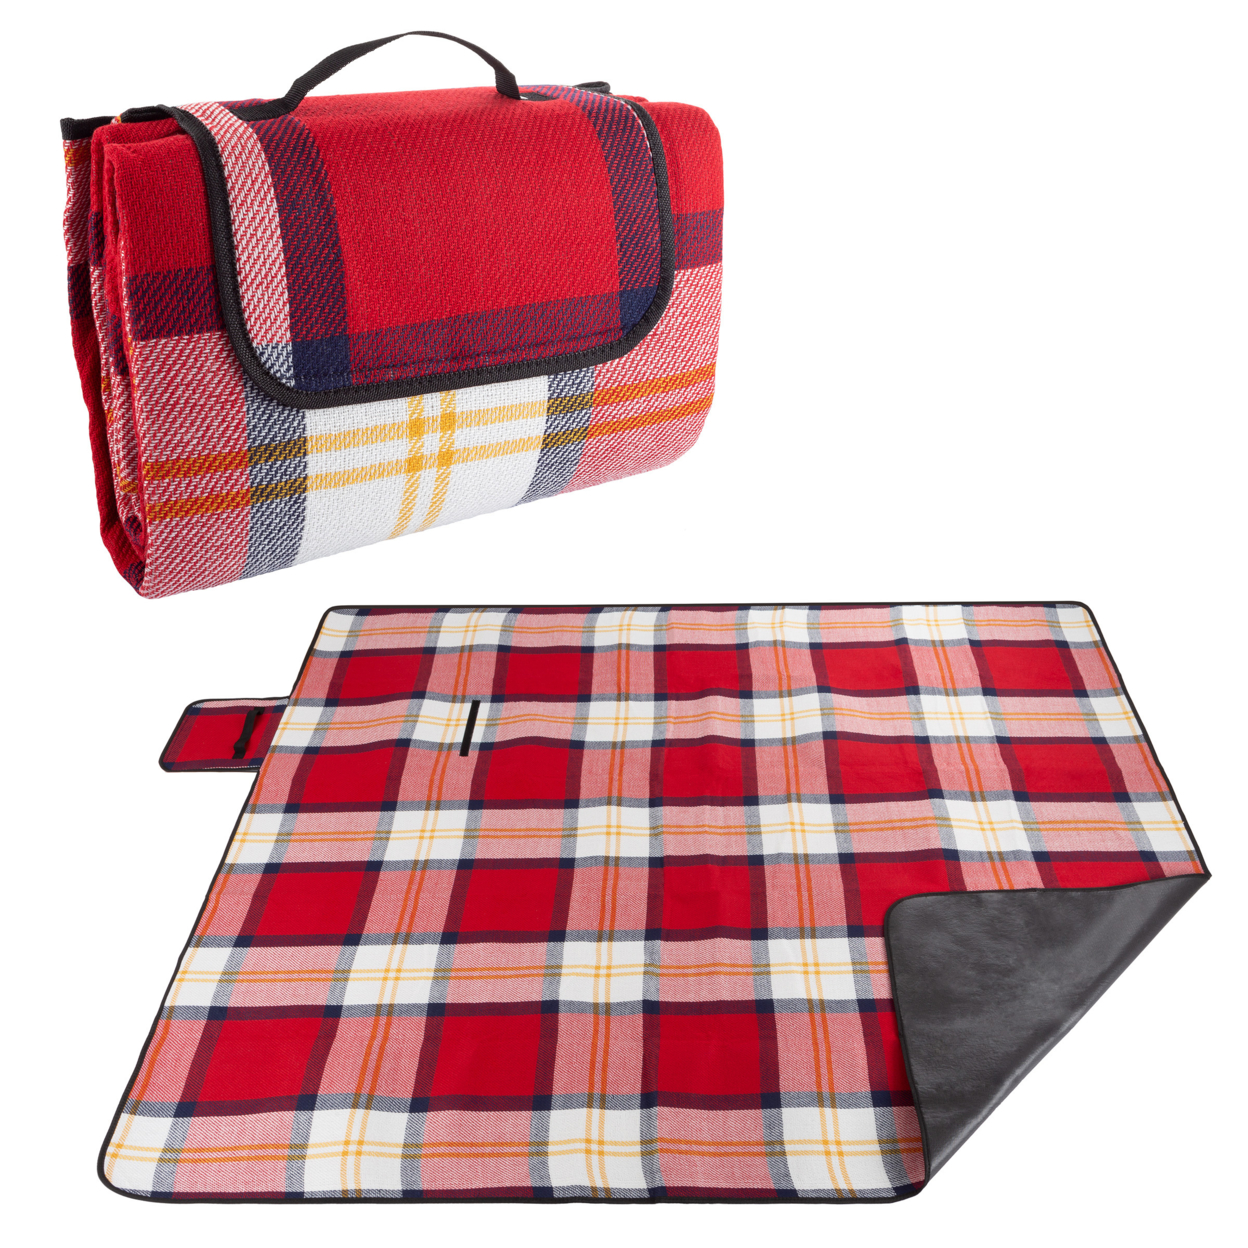 Outdoor Picnic Blanket- Oversized Beach Mat With Foam Padding-Waterproof & Foldable